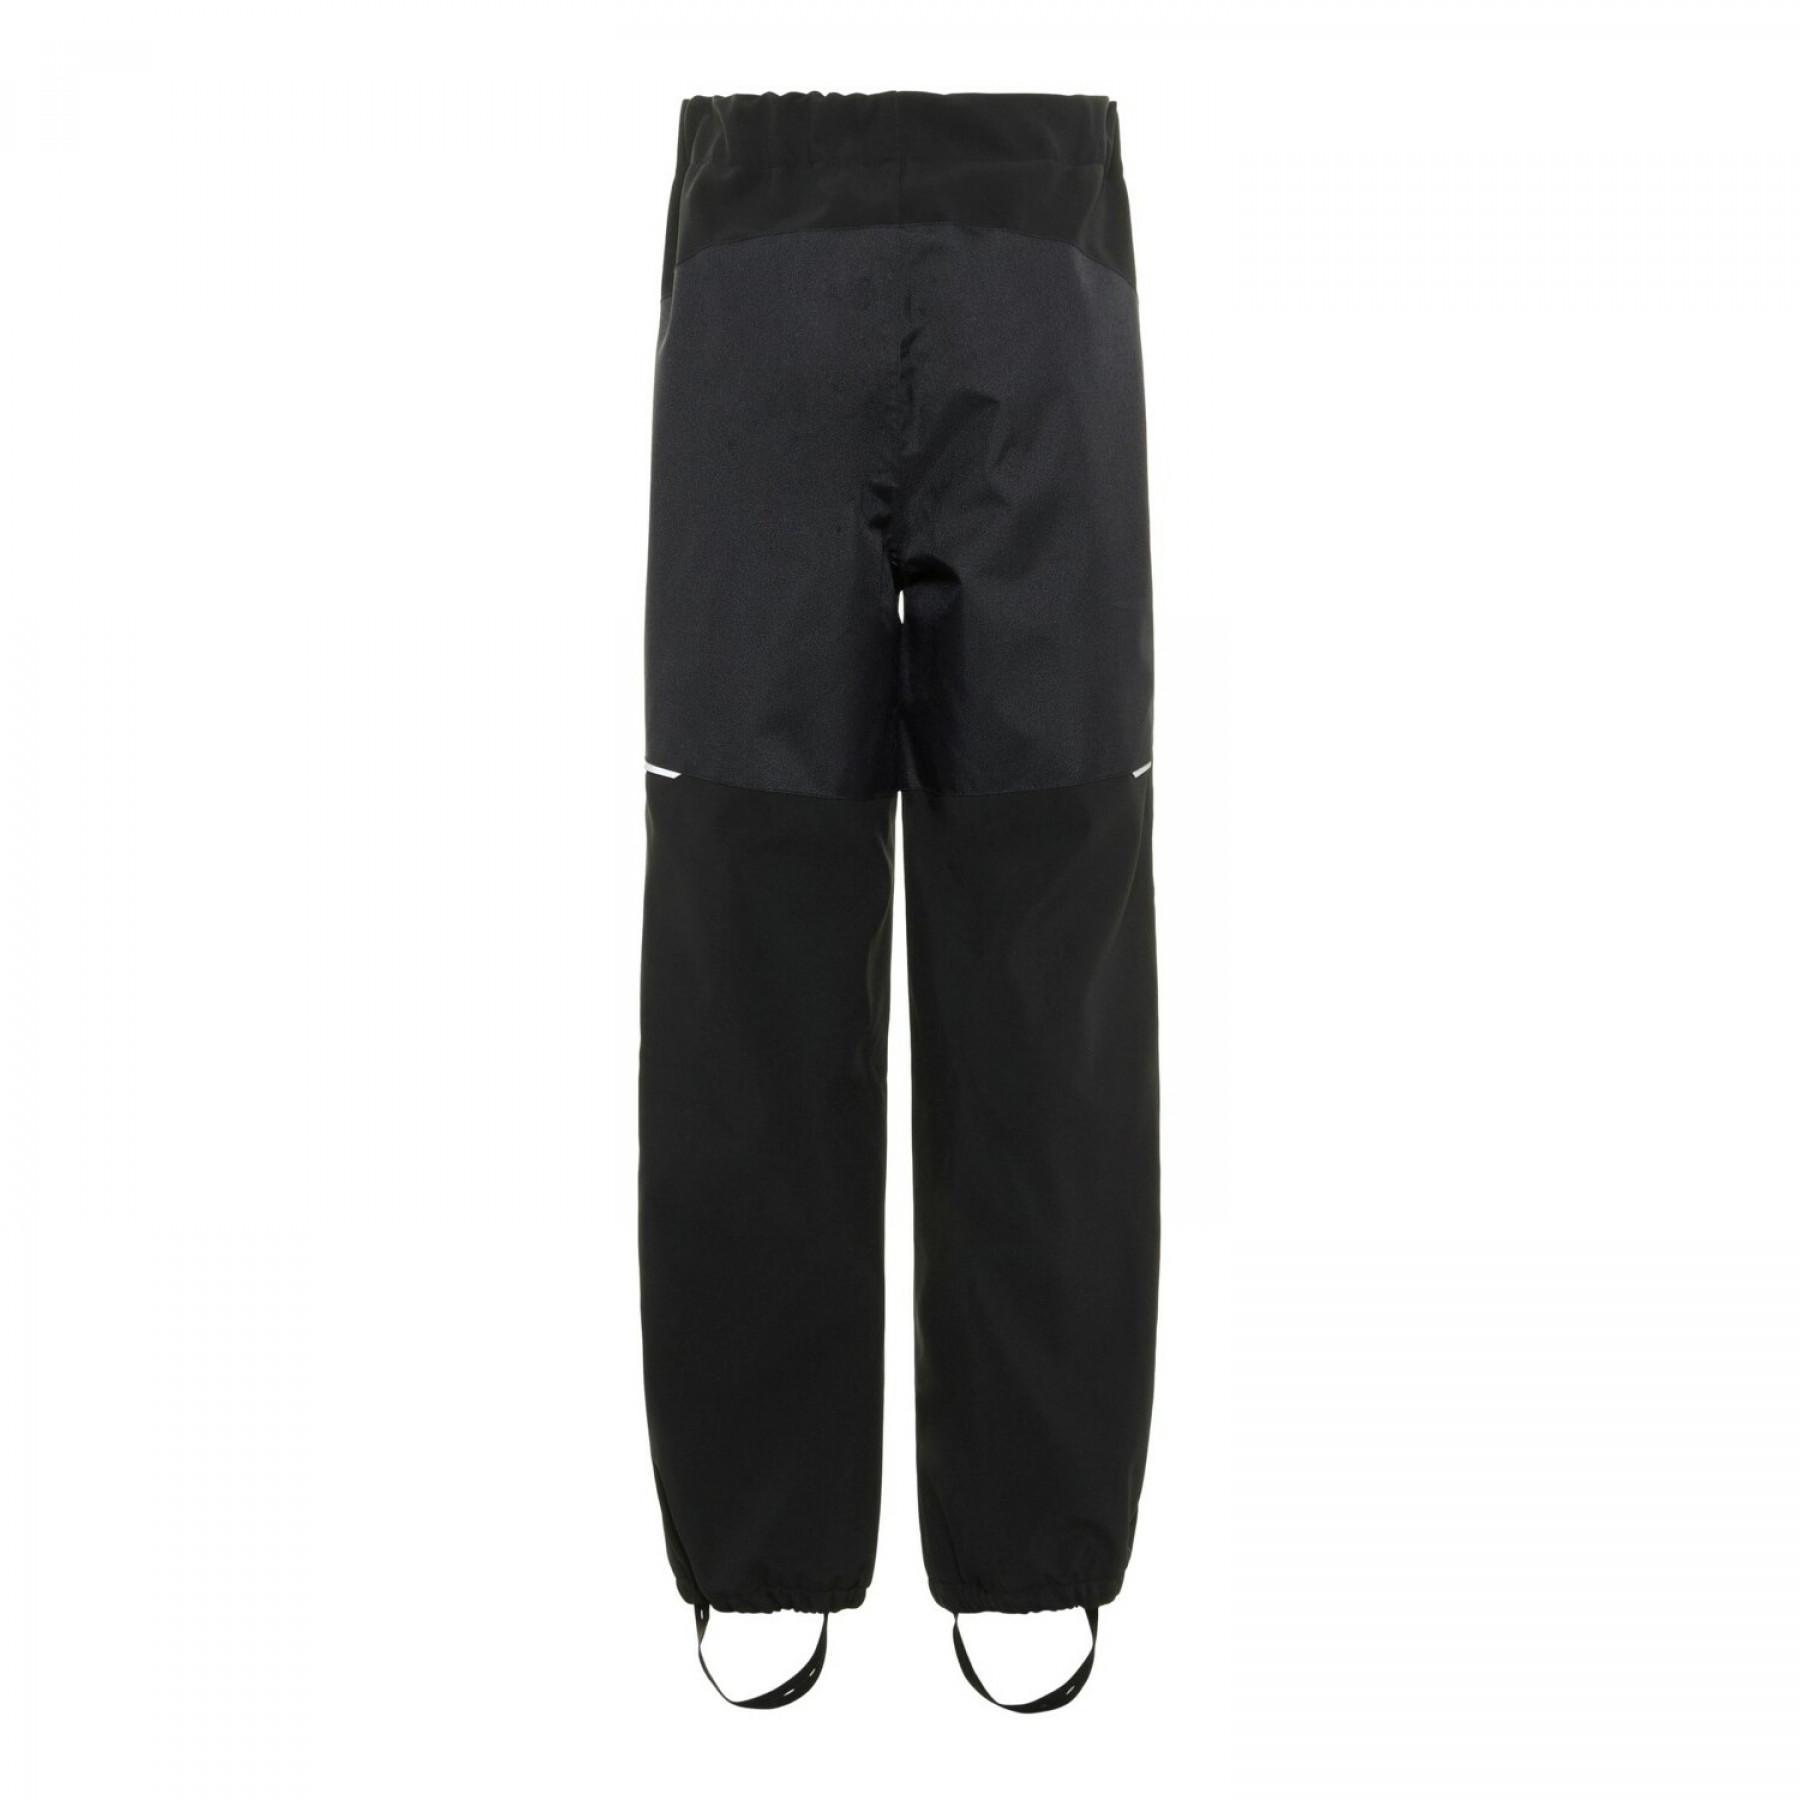 Waterproof trousers for children Name it Alfa